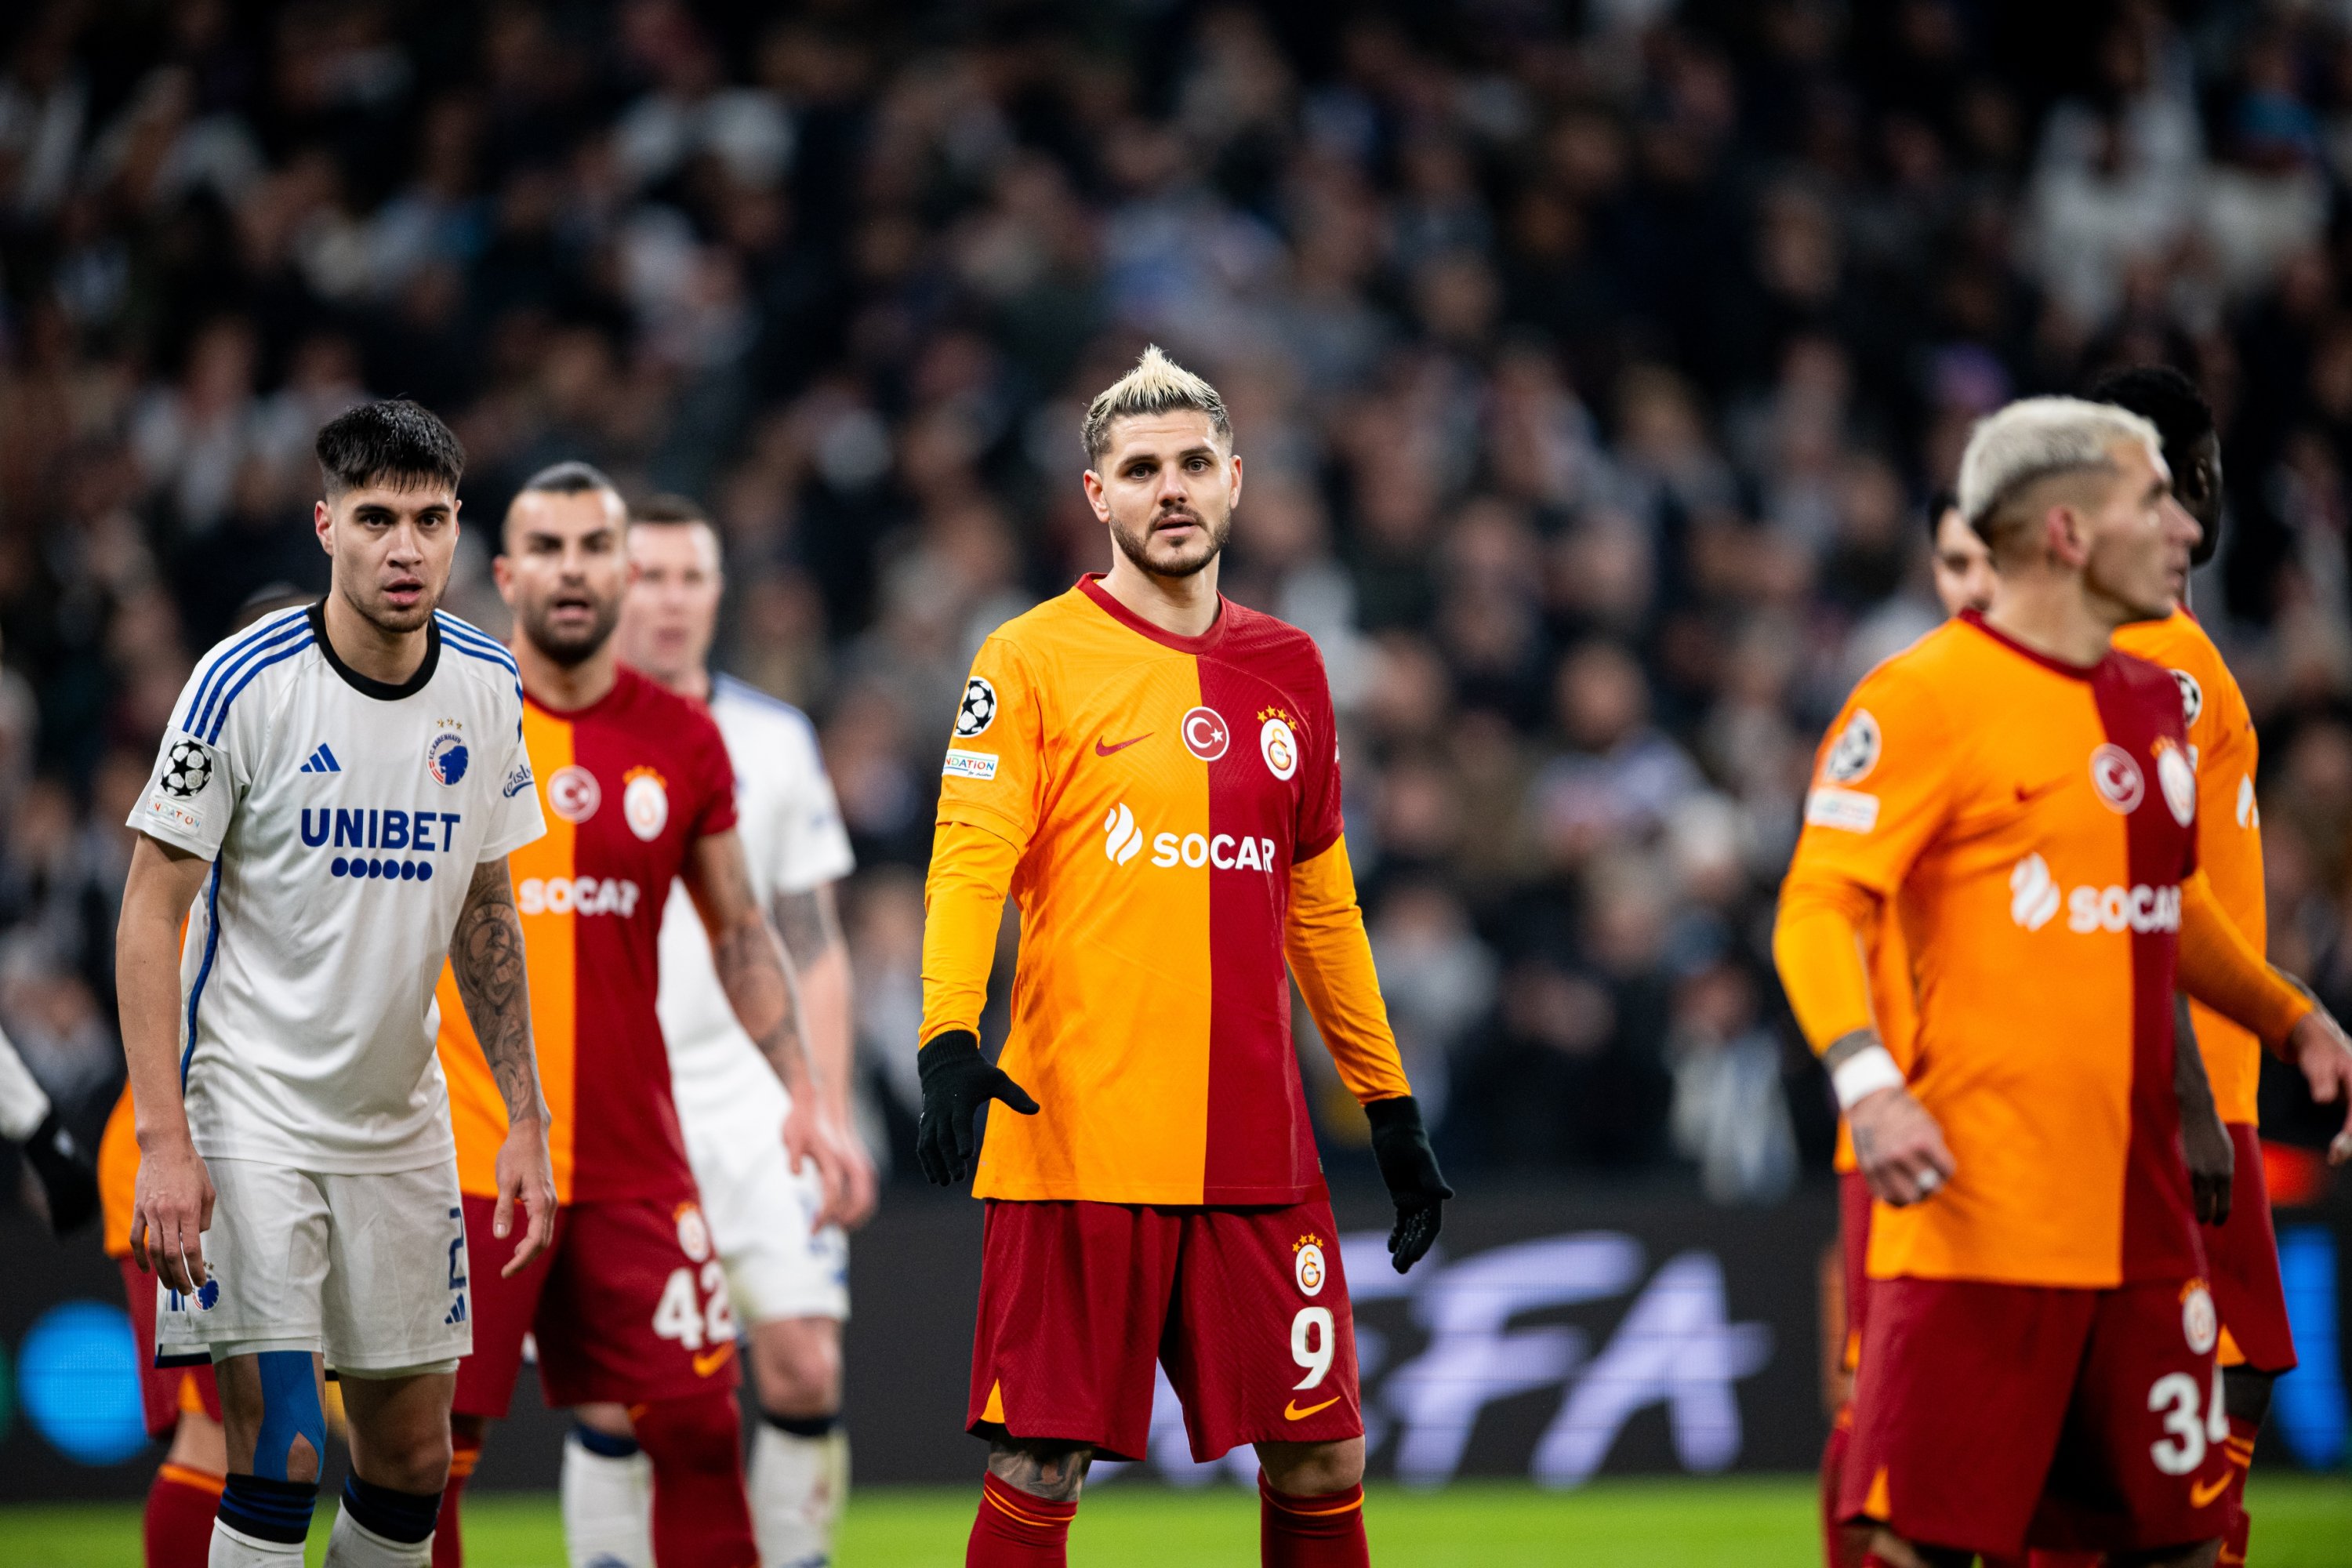 What can opponents expect from Galatasaray in this season's UEFA